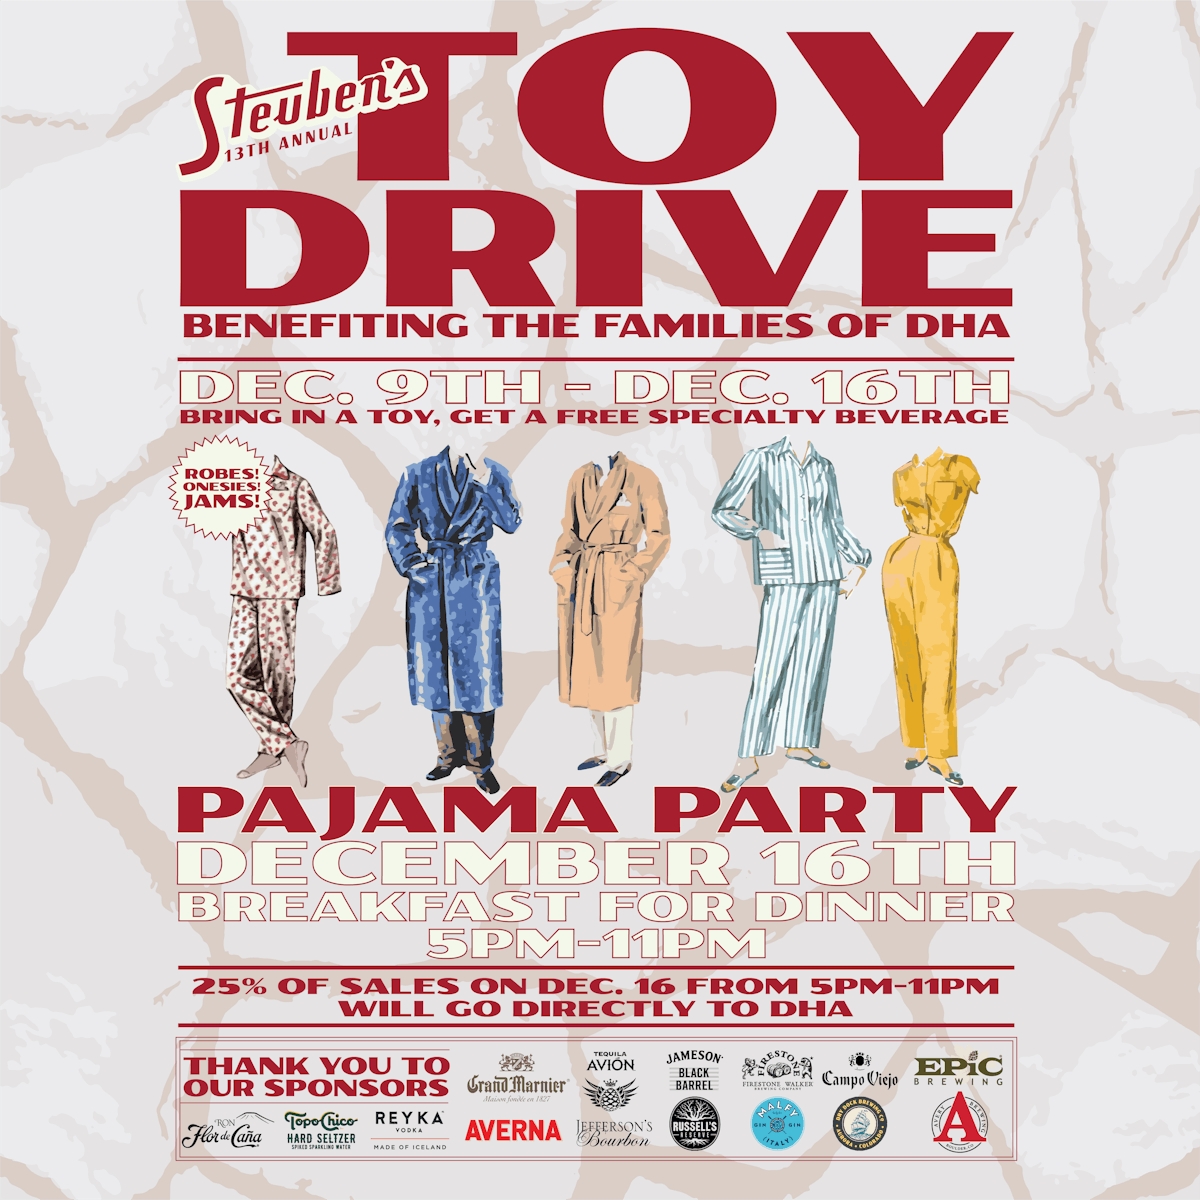 Steuben's 13th annual toy drive poster, pajama party theme